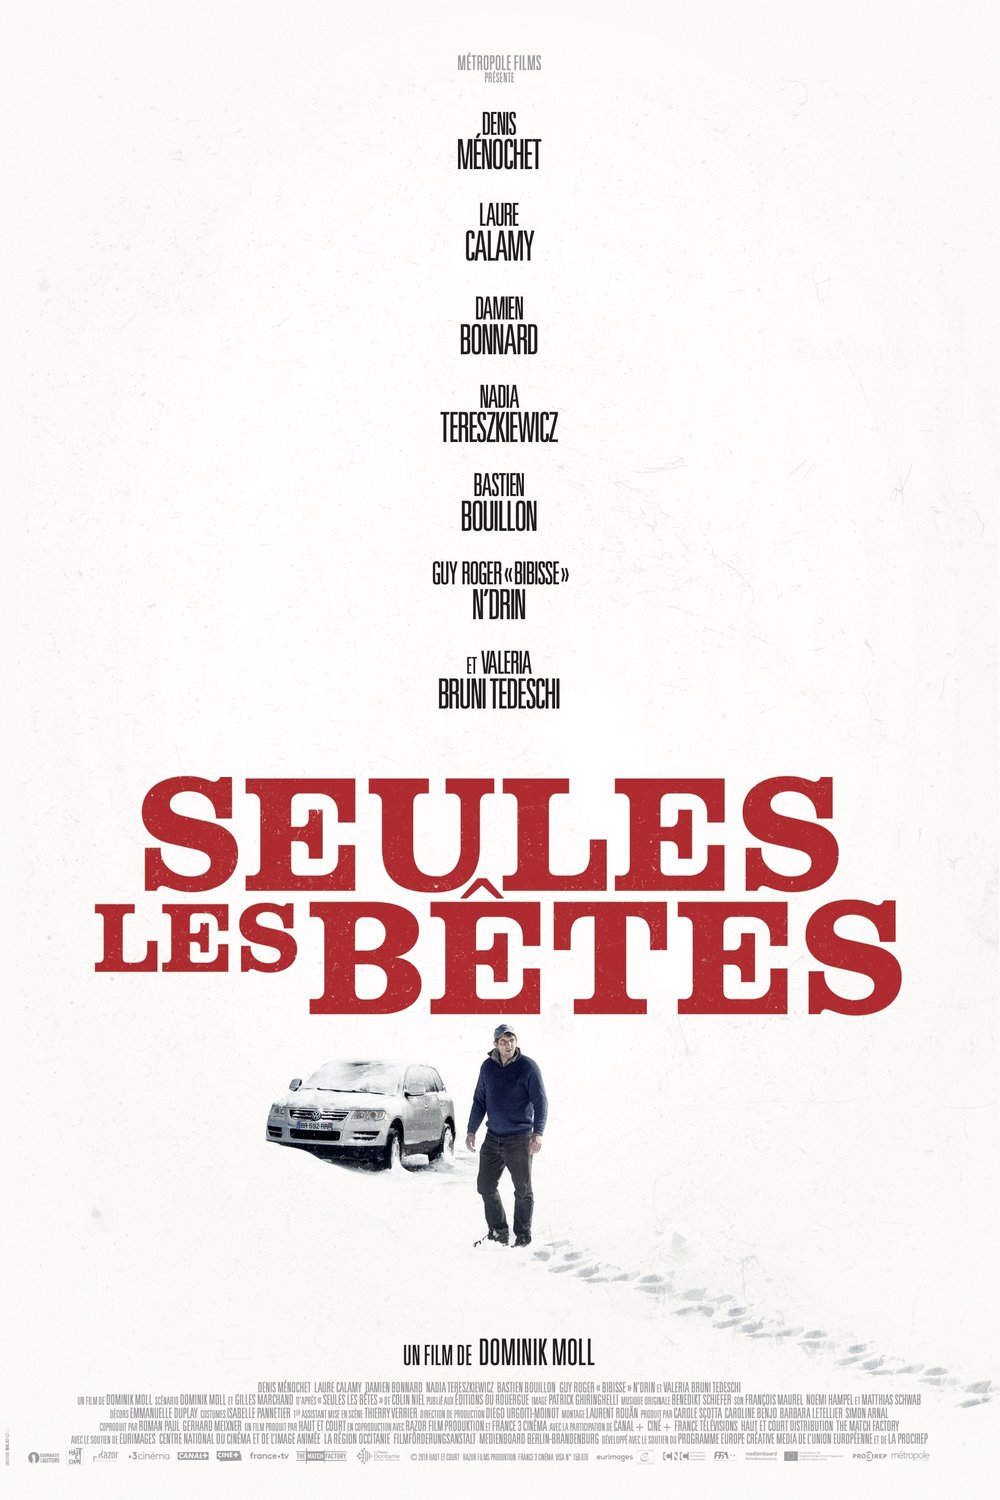 Poster of the movie Seules les bêtes